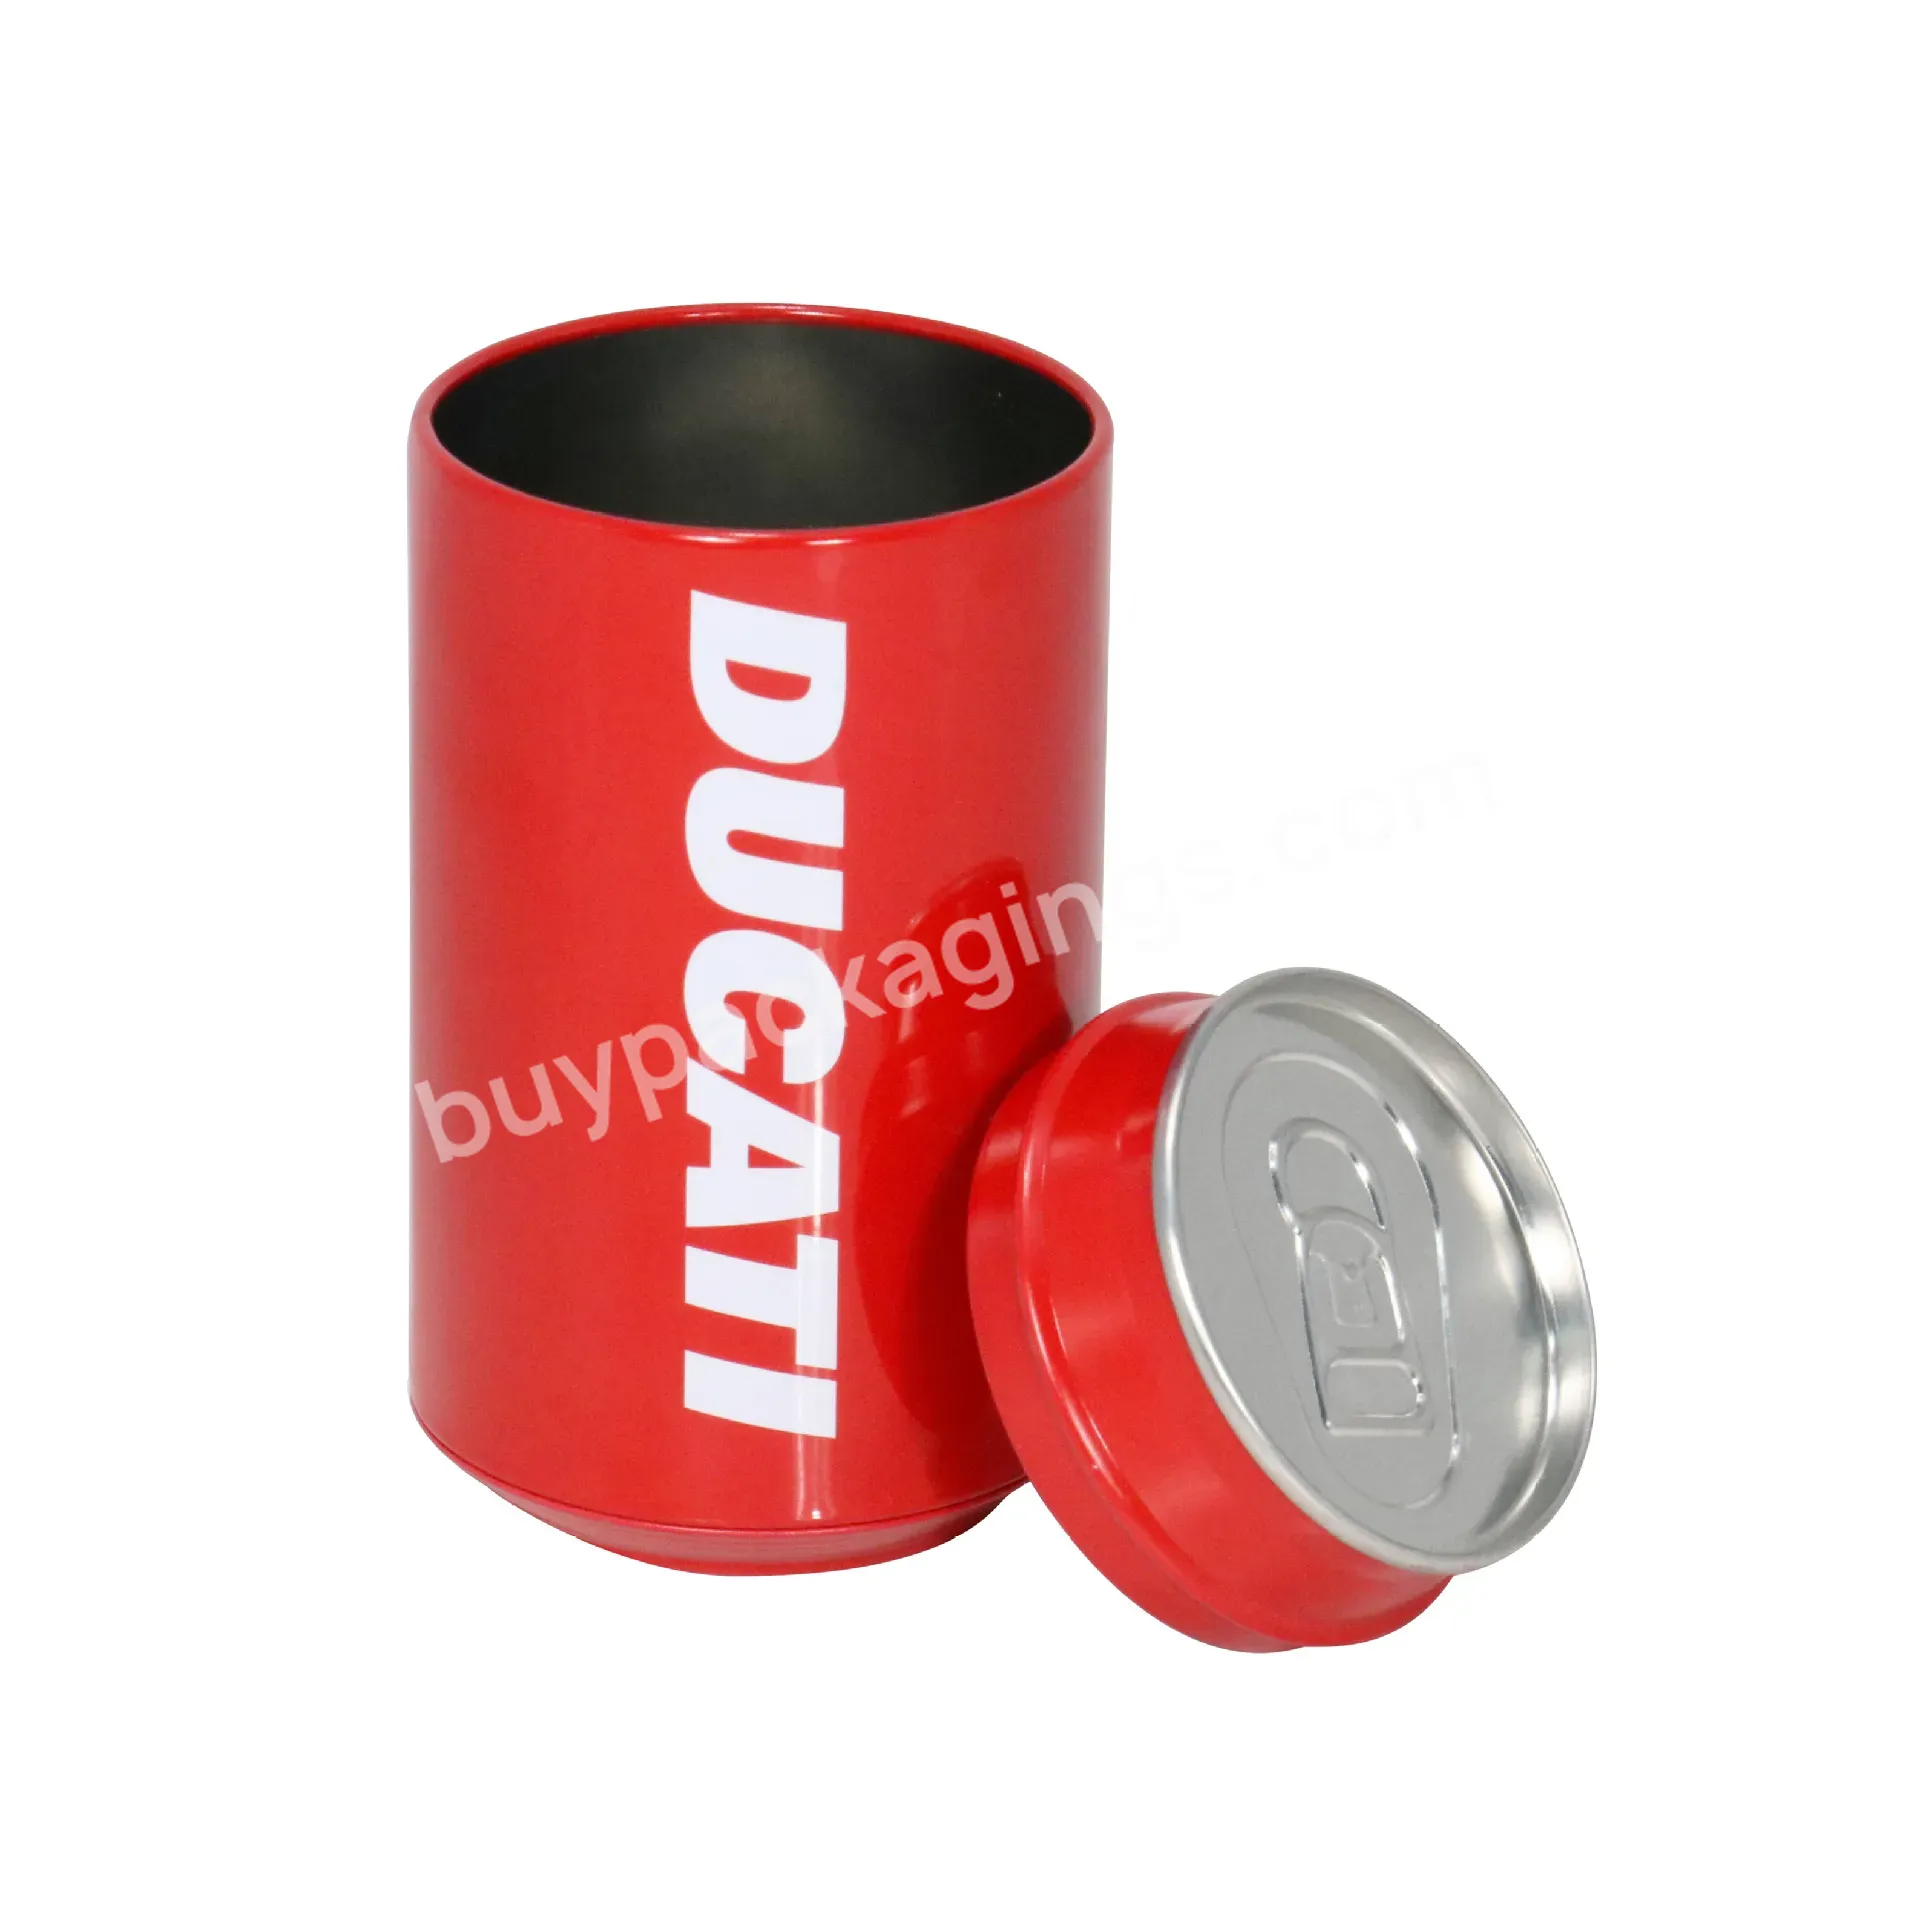 Newly Durable 0.23-0.35mm Tinplate Metal Tin Cola Shaped T-shirt Socks Towel Underwear Package Cans